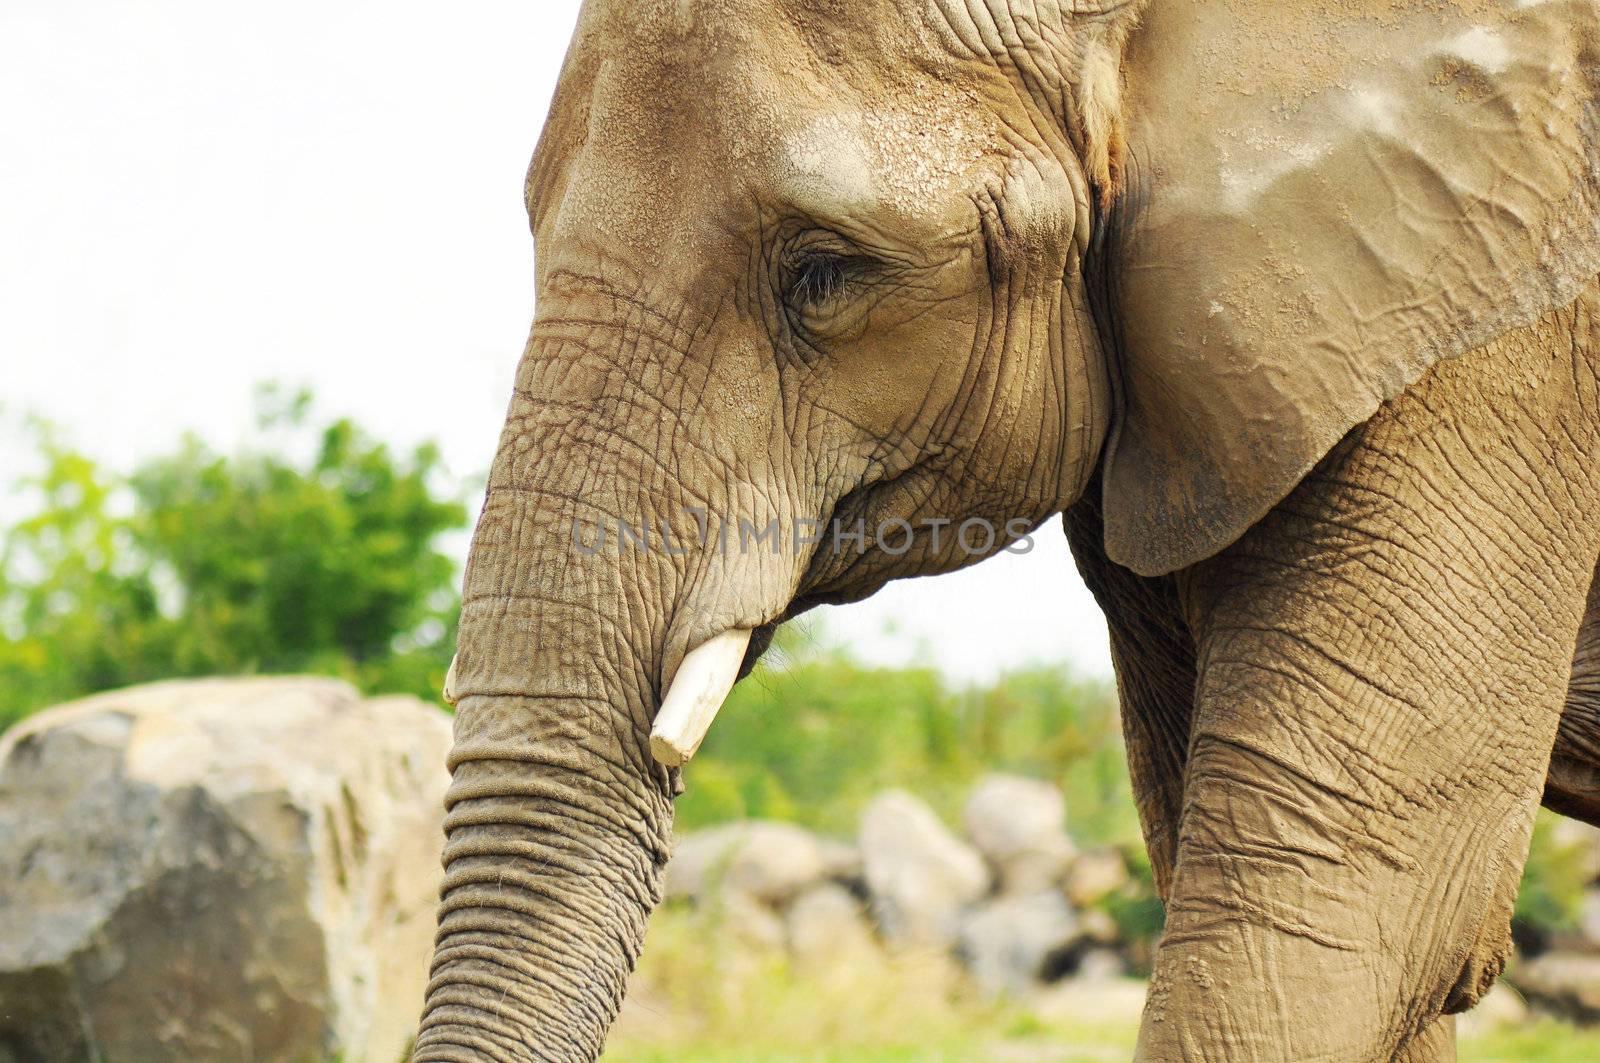 Beautiful animal portrait of a mature african elephant, great skin details.